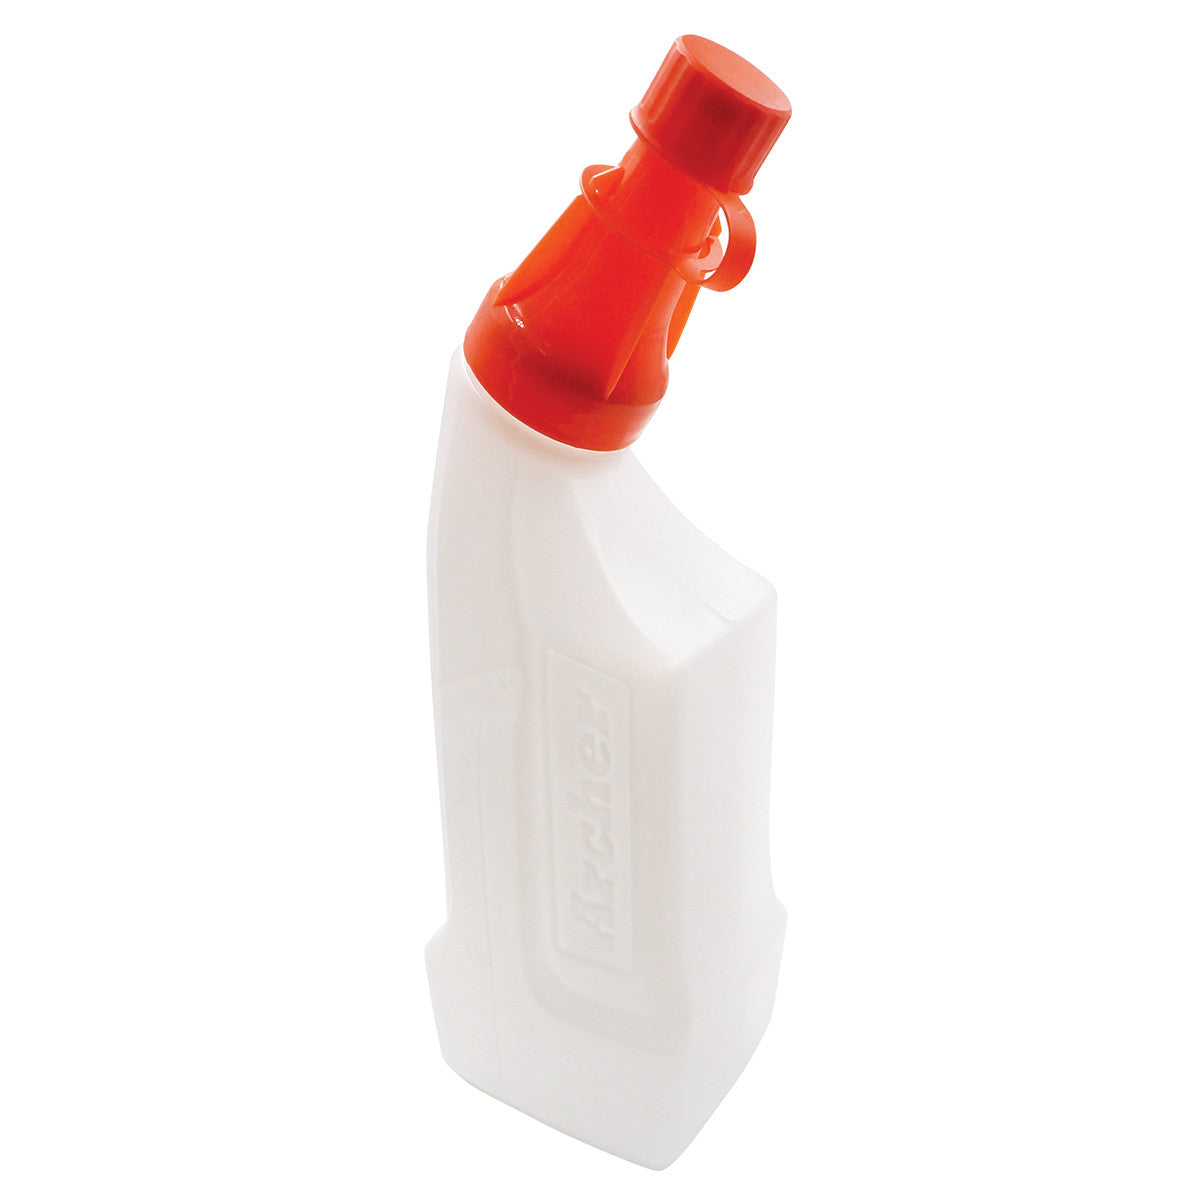 JakMax 1-Litre Pointed Fuel Mixing Bottle